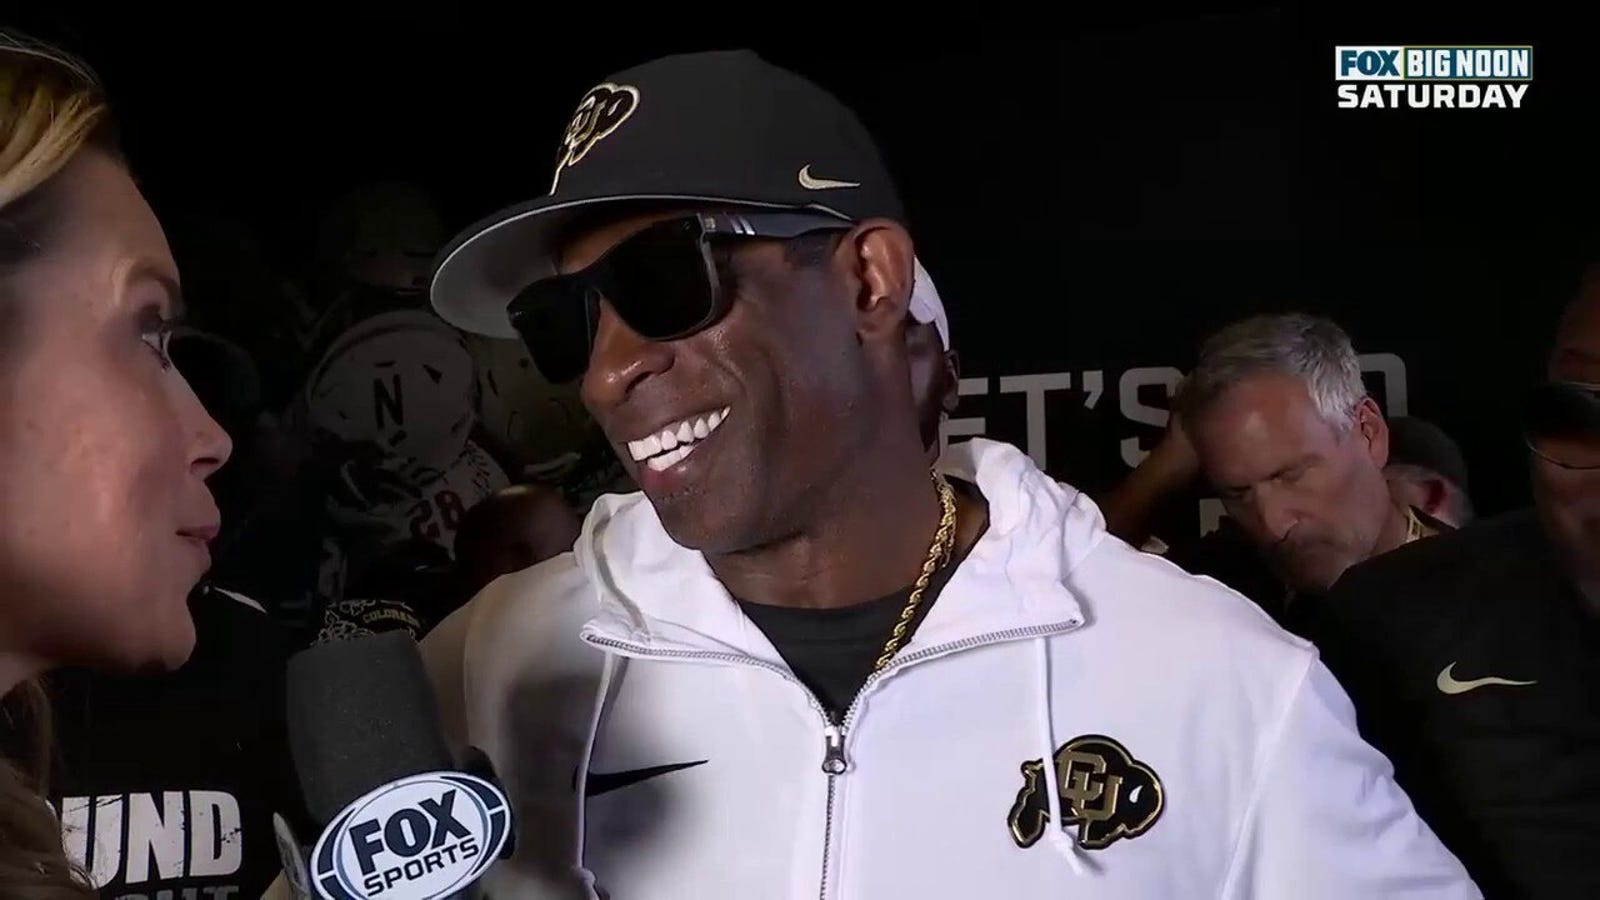 'I told you we were coming' — Deion Sanders speaks after the game